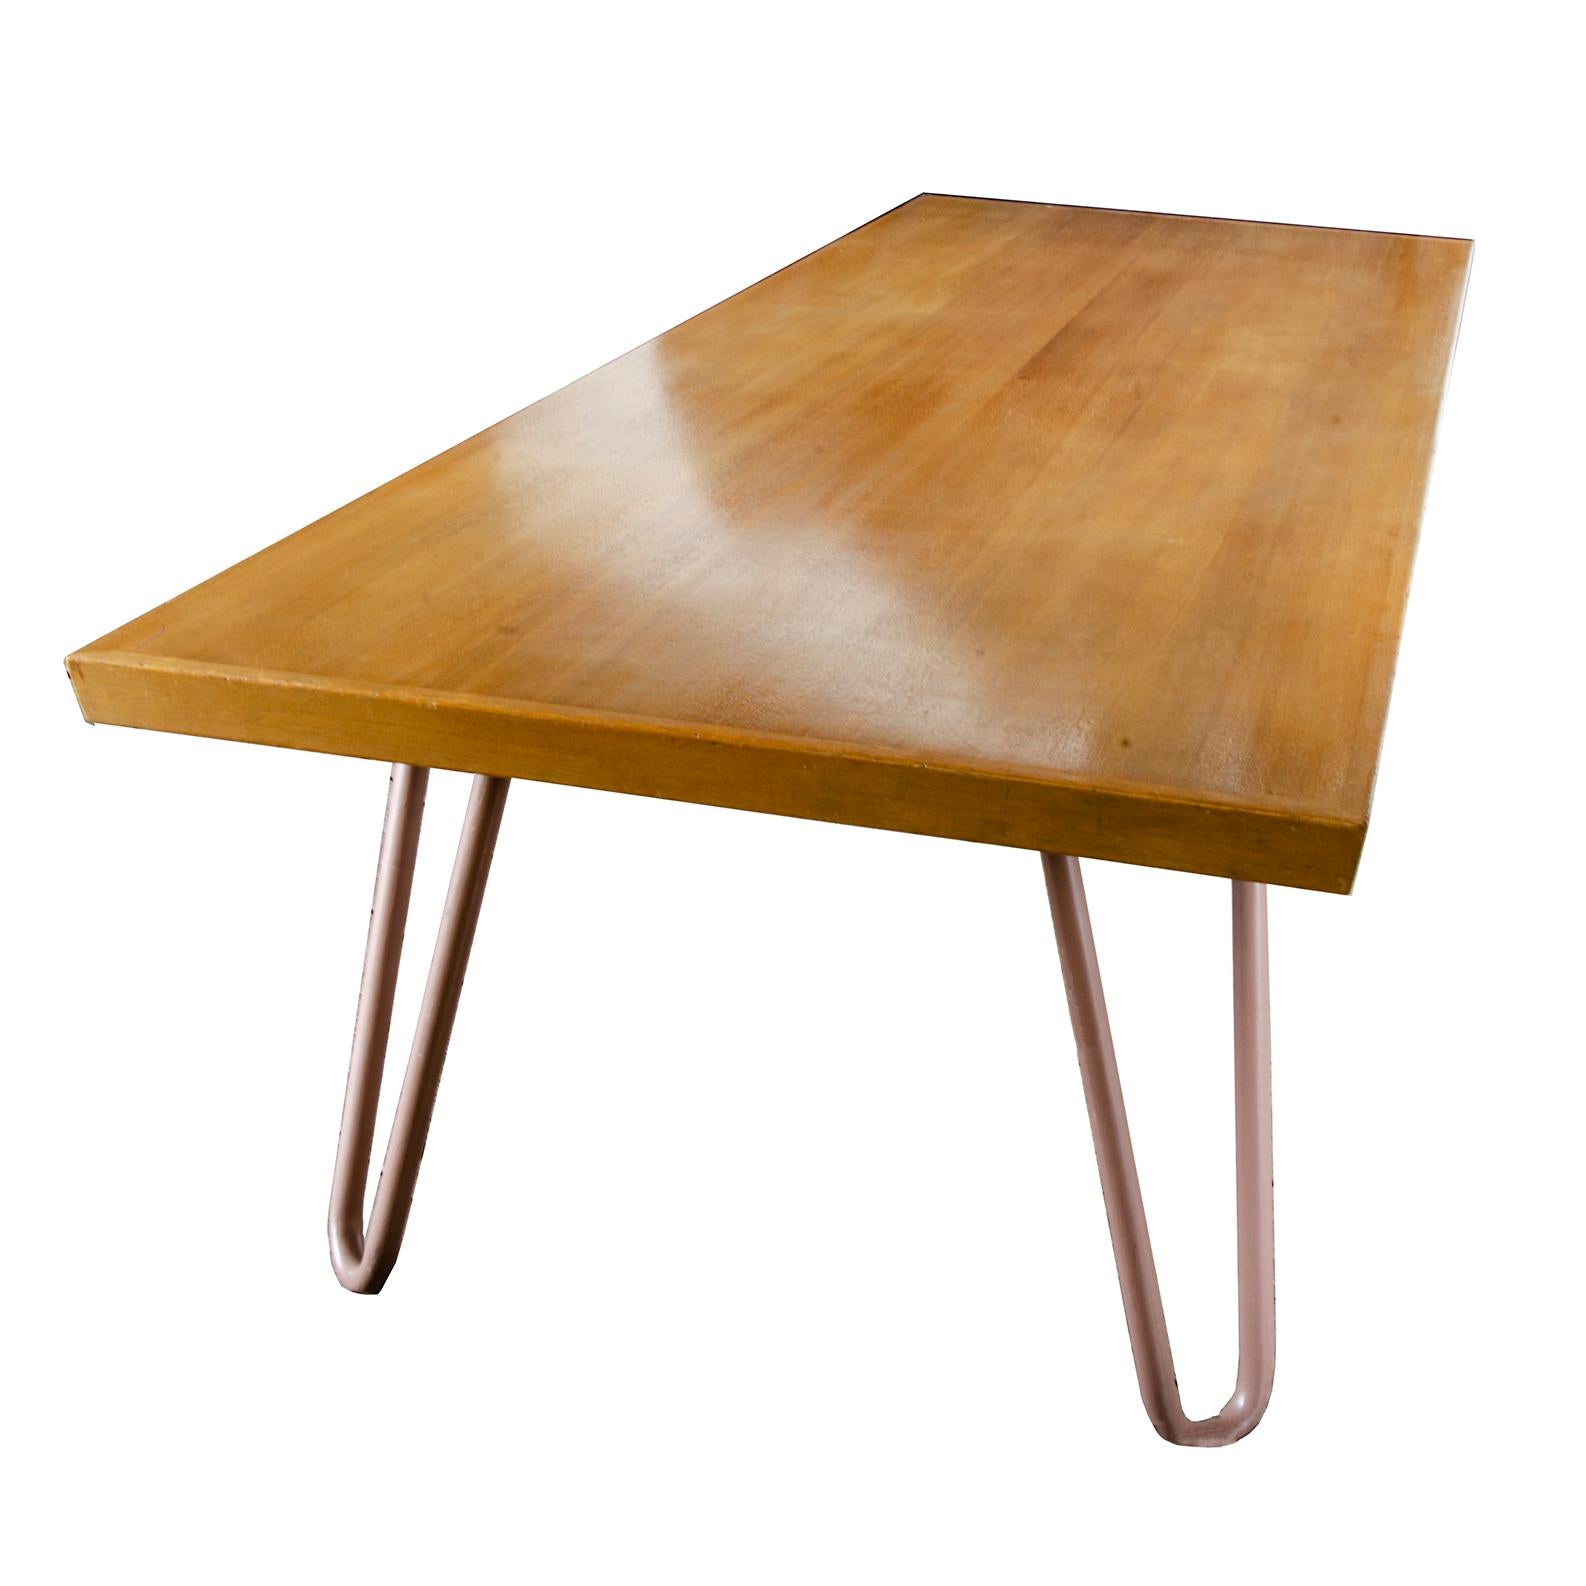 This large midcentury table is grand enough for a conference table, but could definitely do a fine job in any dining room. Four hairpin style legs in stout proportions jut out from the solid maple top. The clean silhouette would blend seamlessly in